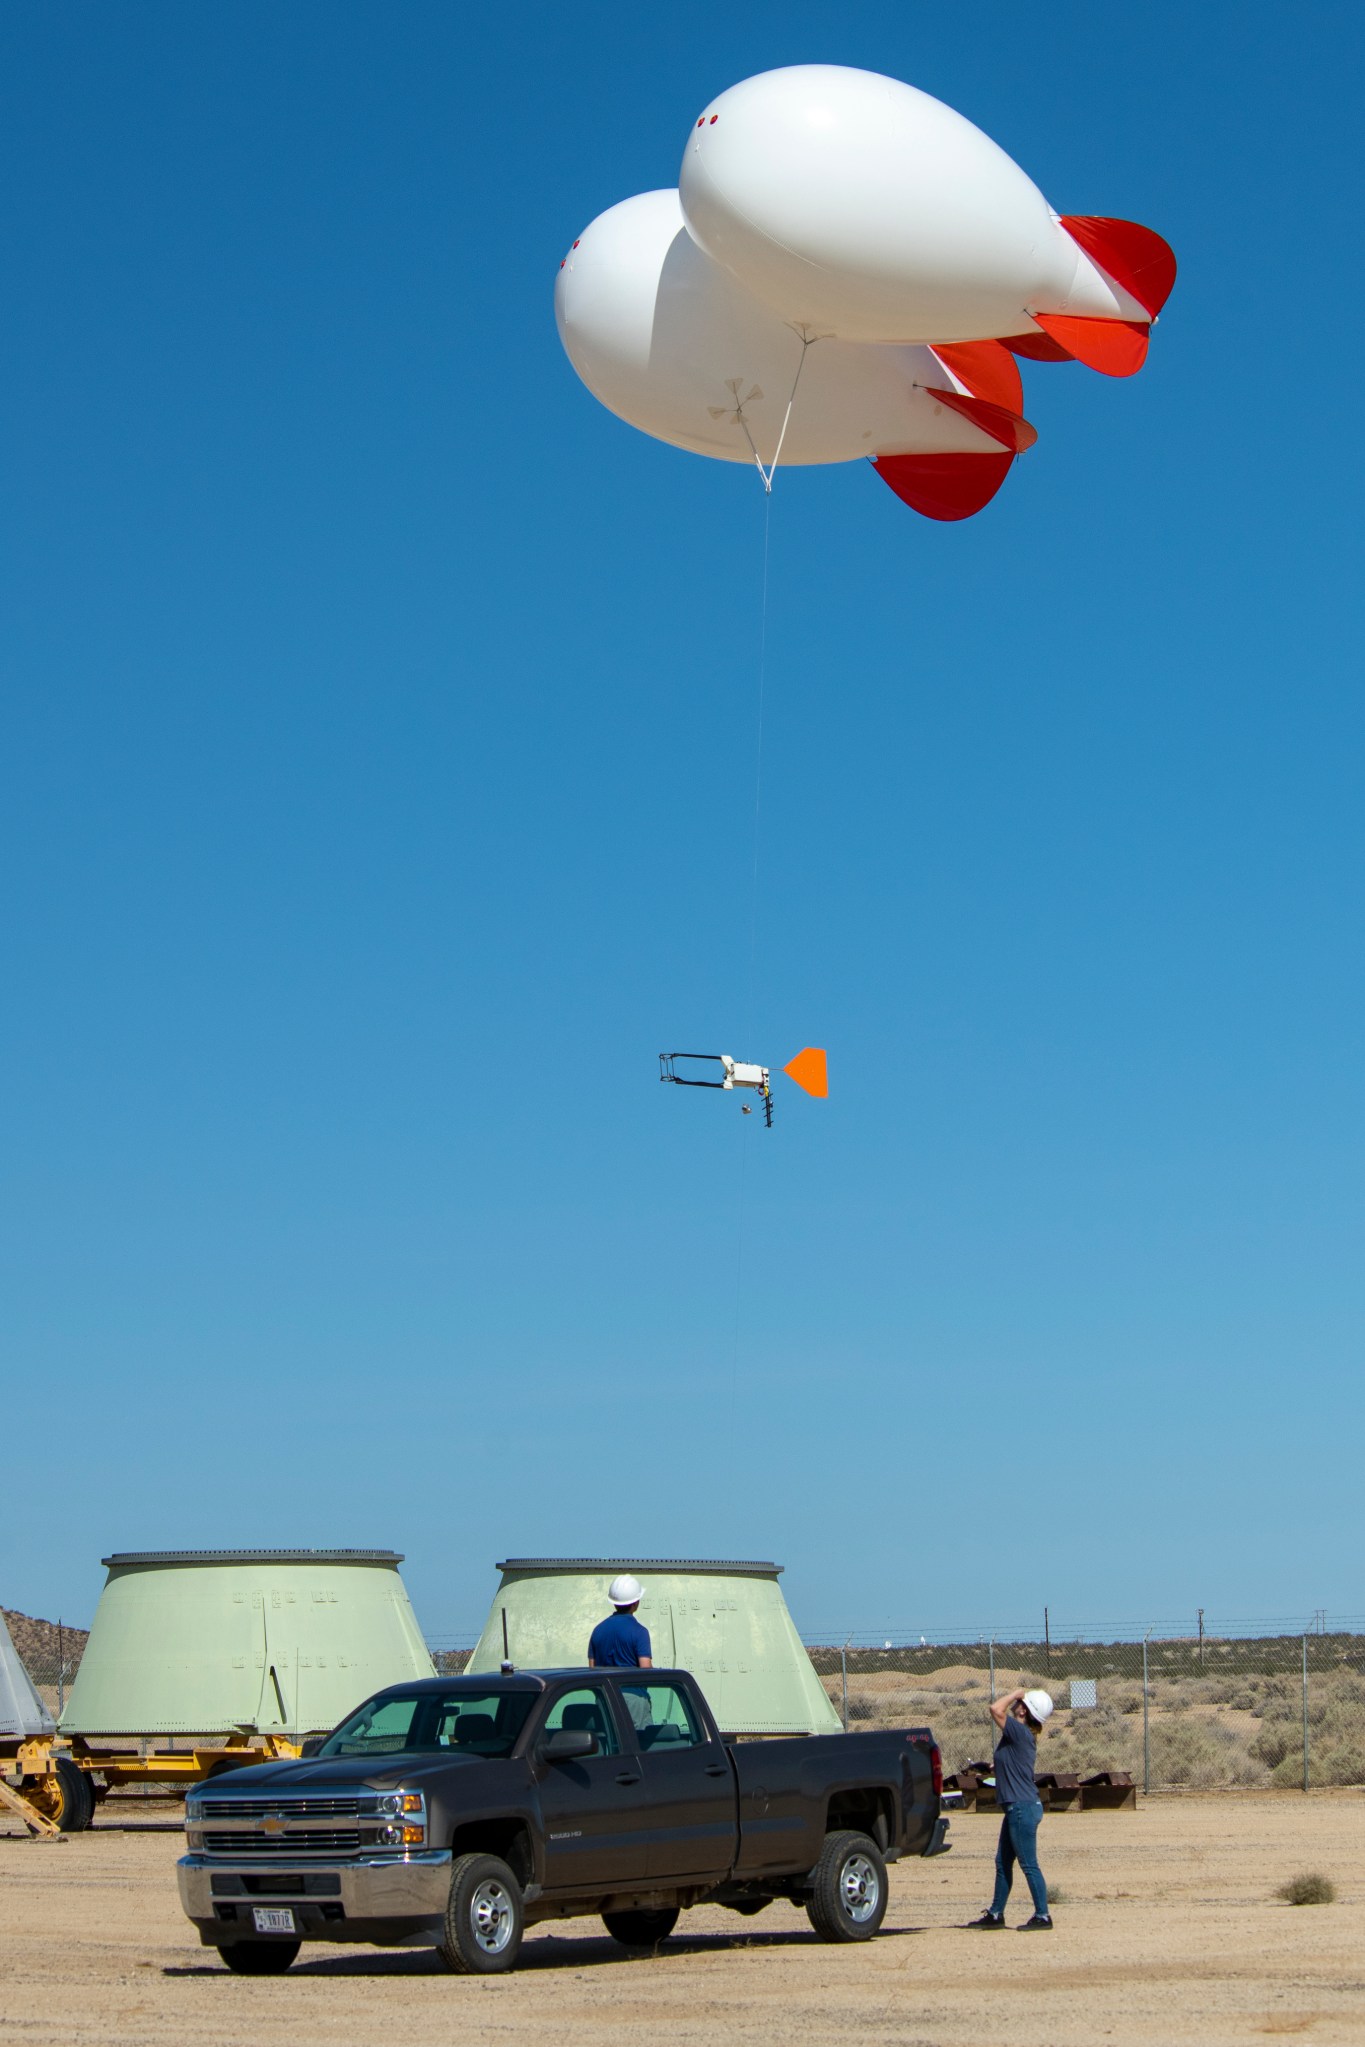 A weather instrument is attached to two balloons above it. The balloons are tied to a dark gray truck parked below.